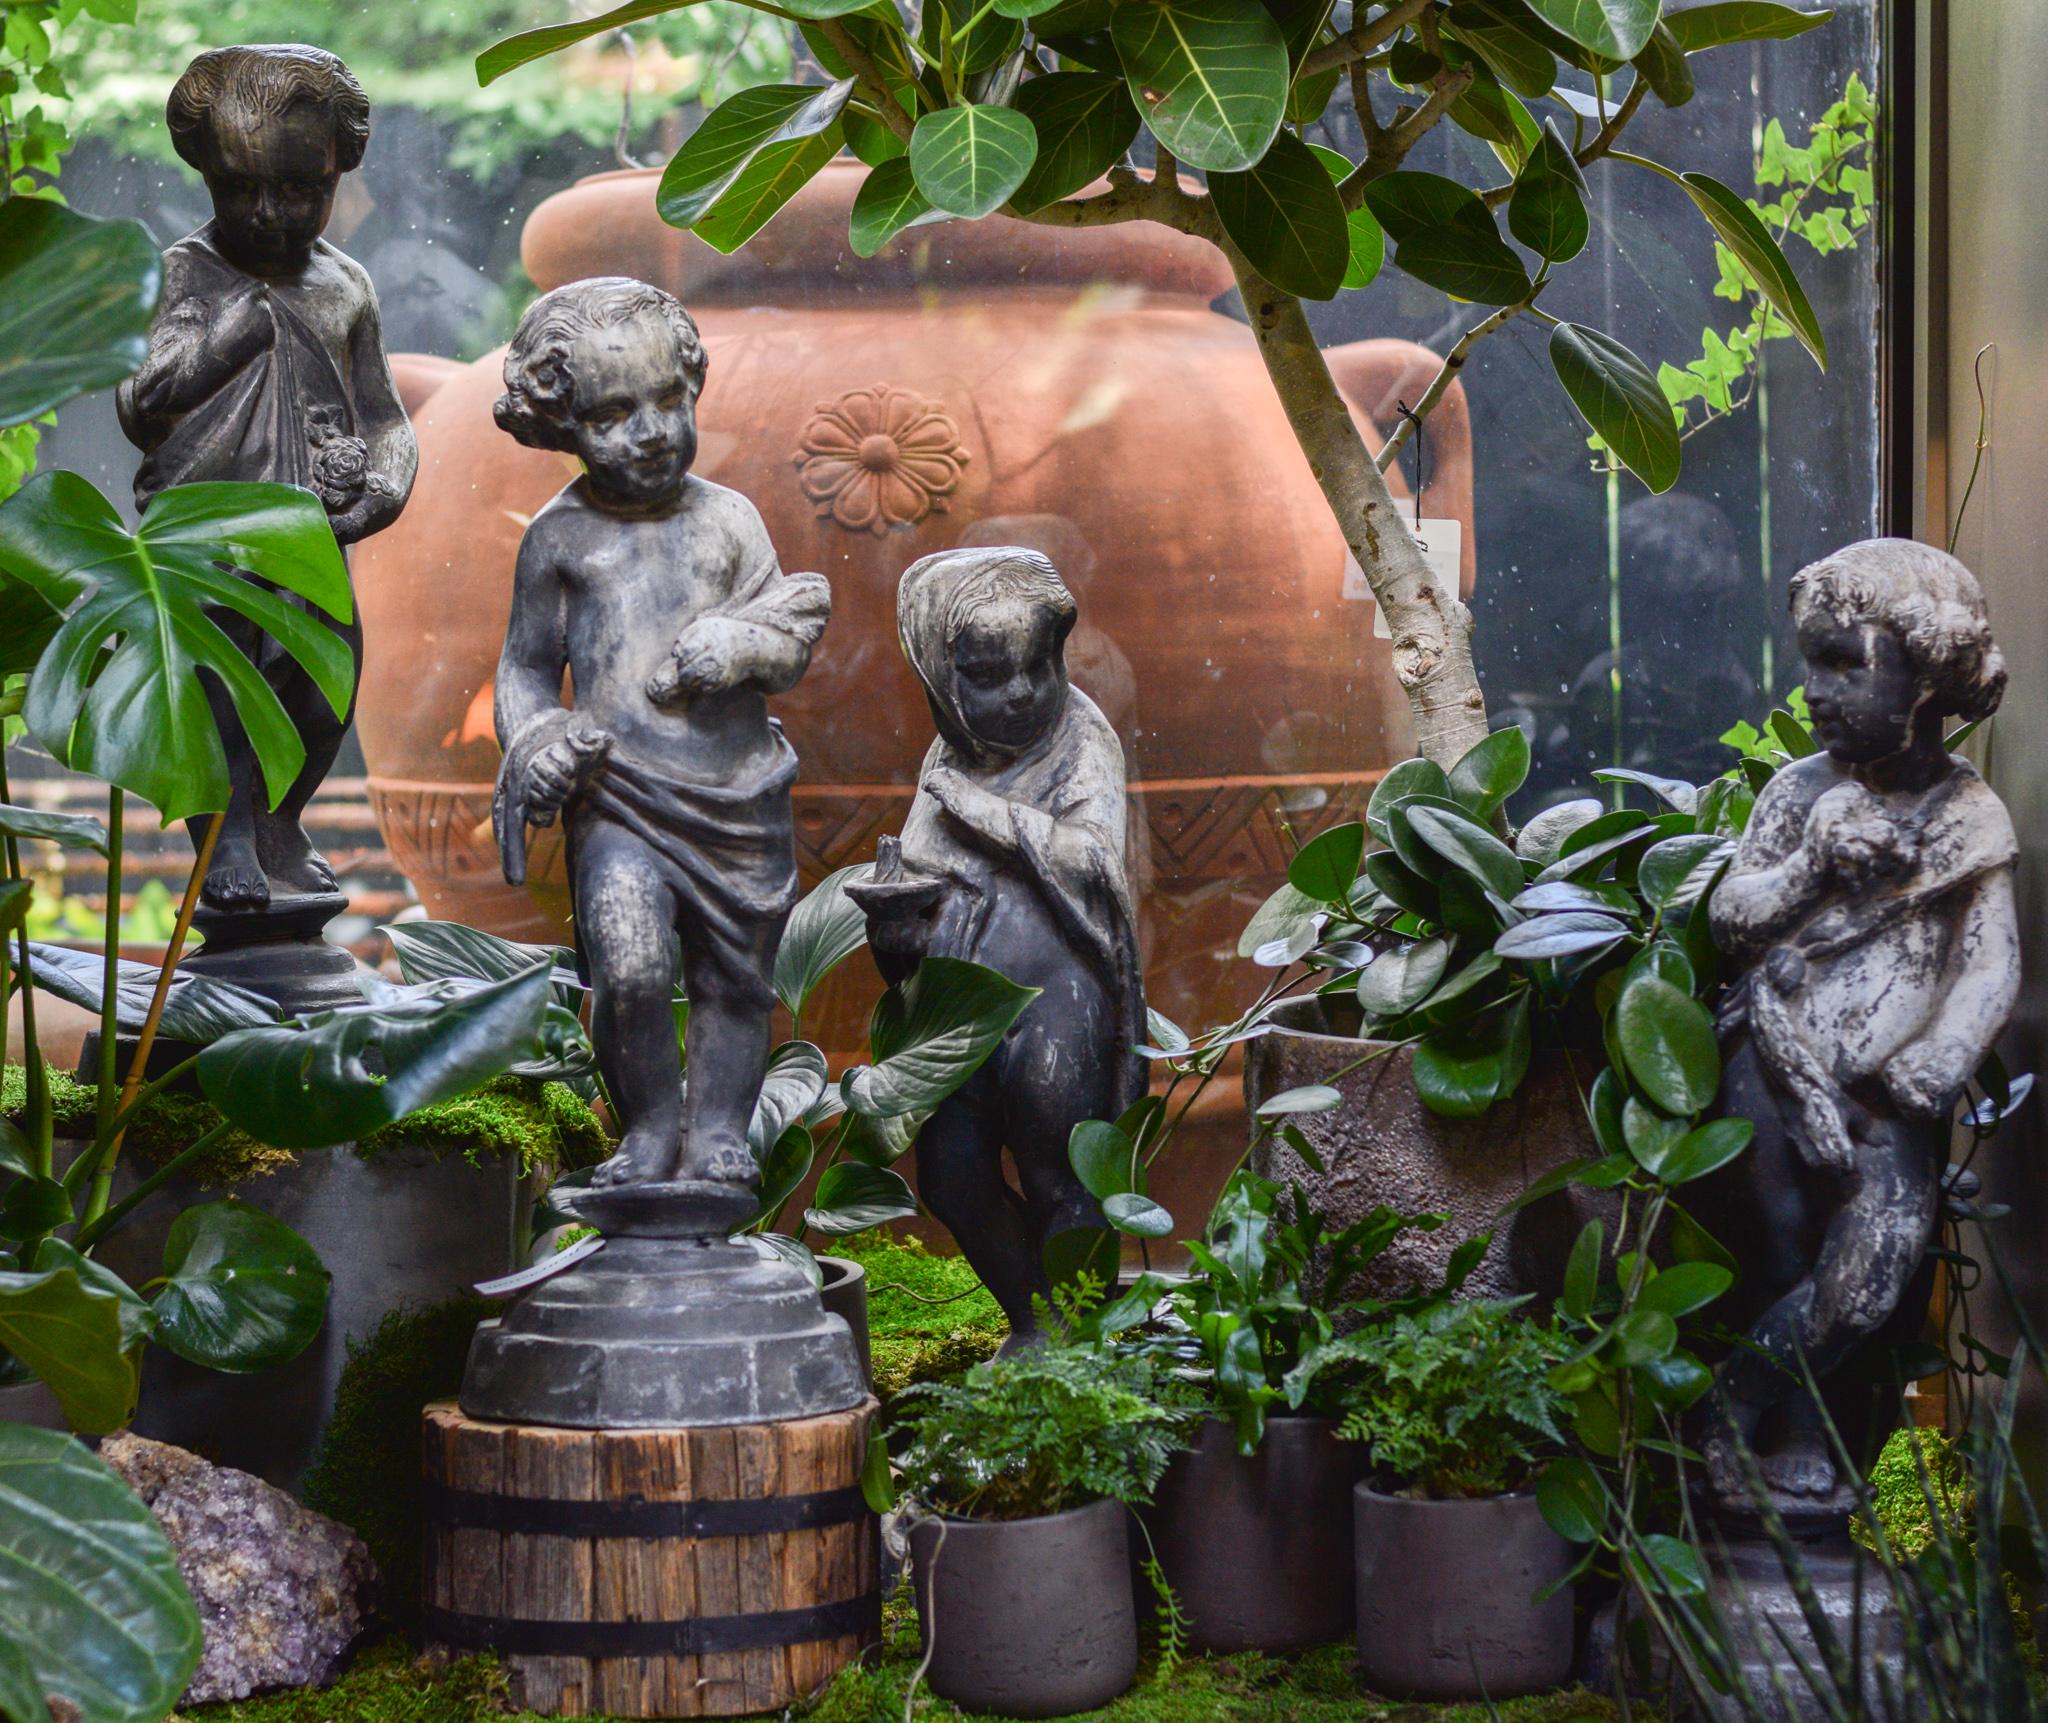 In the grand tradition of classical mythology, these four lead sculptures represent the original personifications of nature in all their seasonal aspects.
Each figure has been created with endearing cherubic features, giving them a spritely and